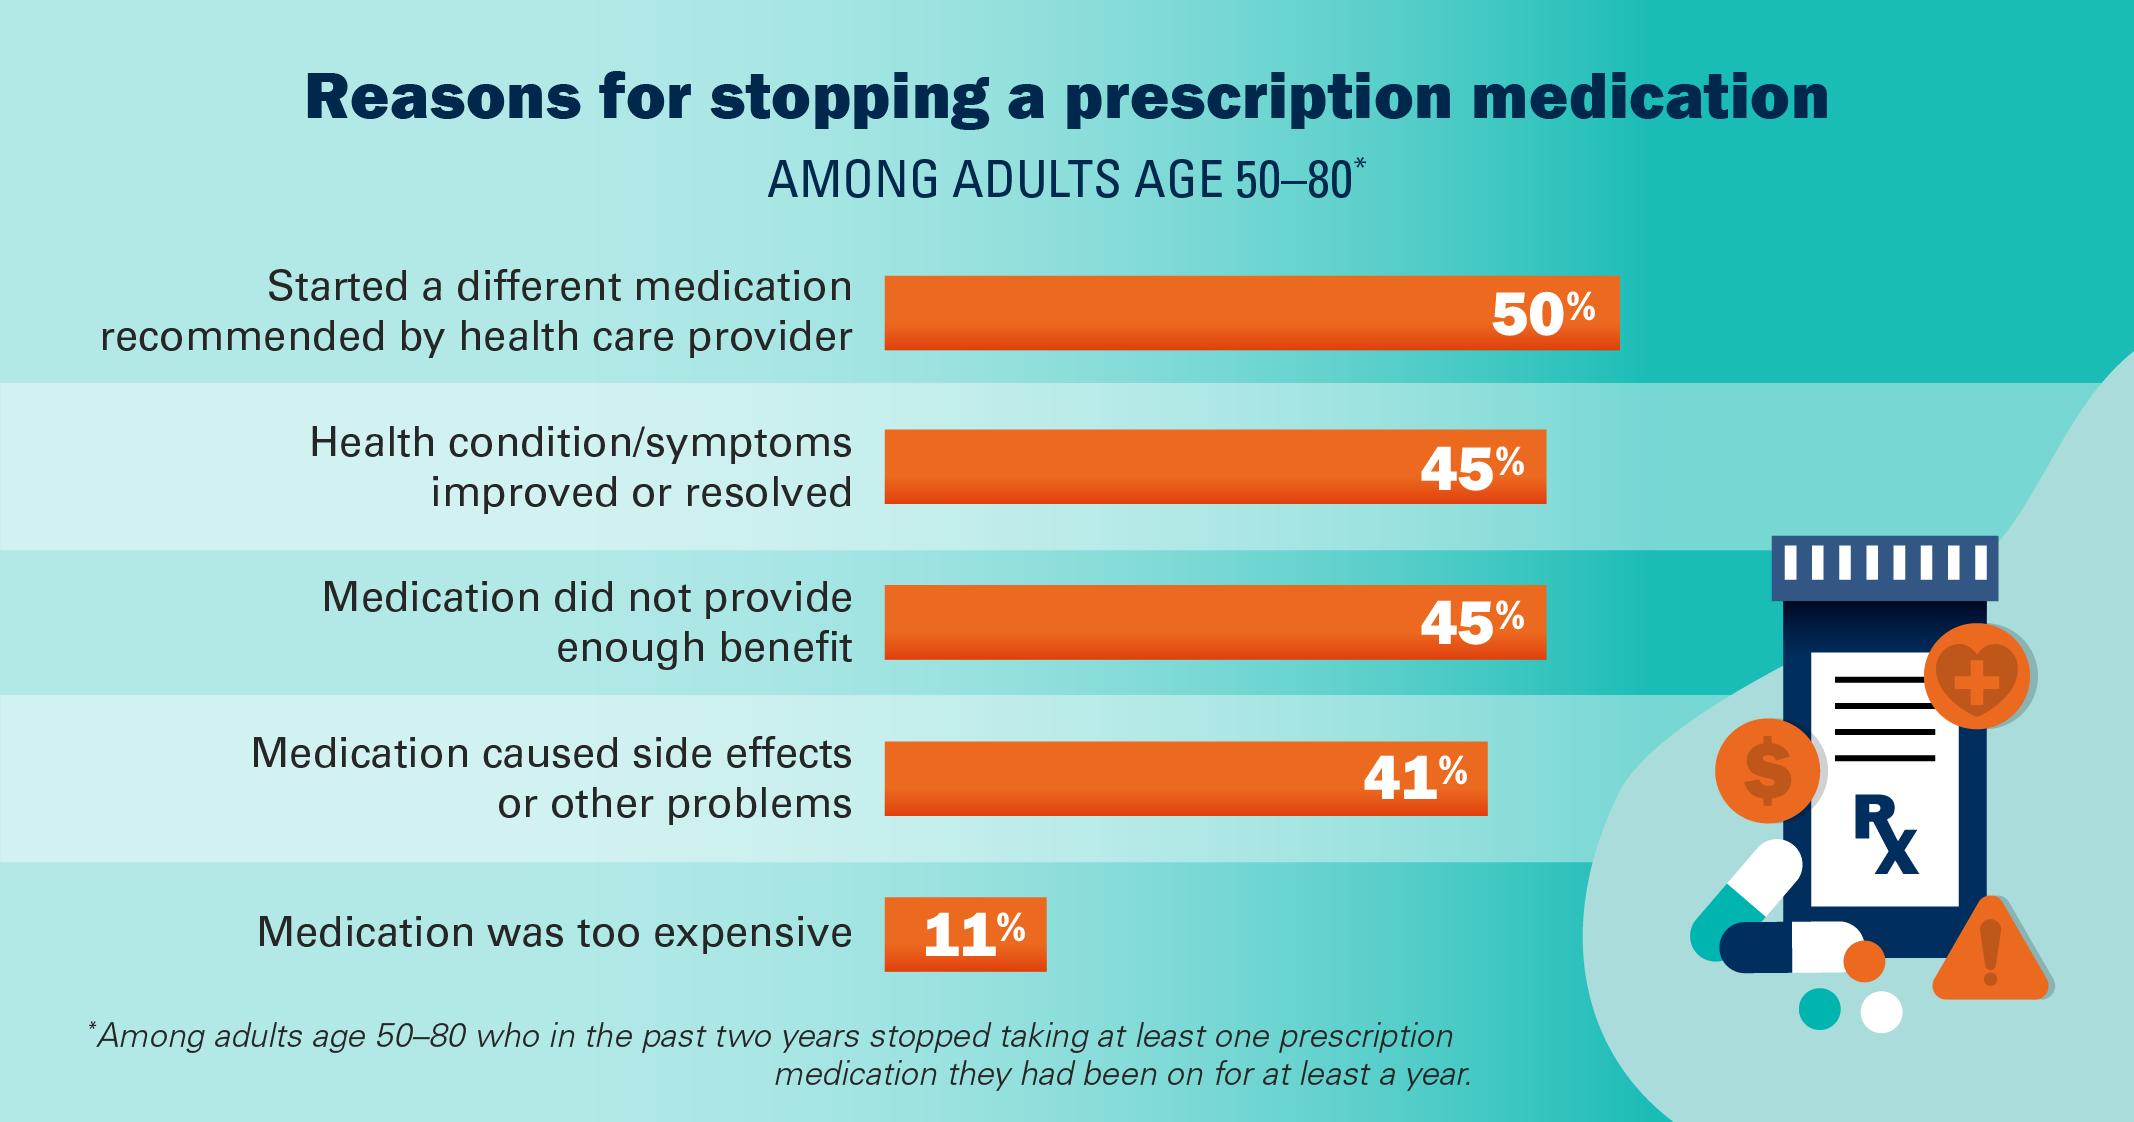 Reasons patients give for stopping medications